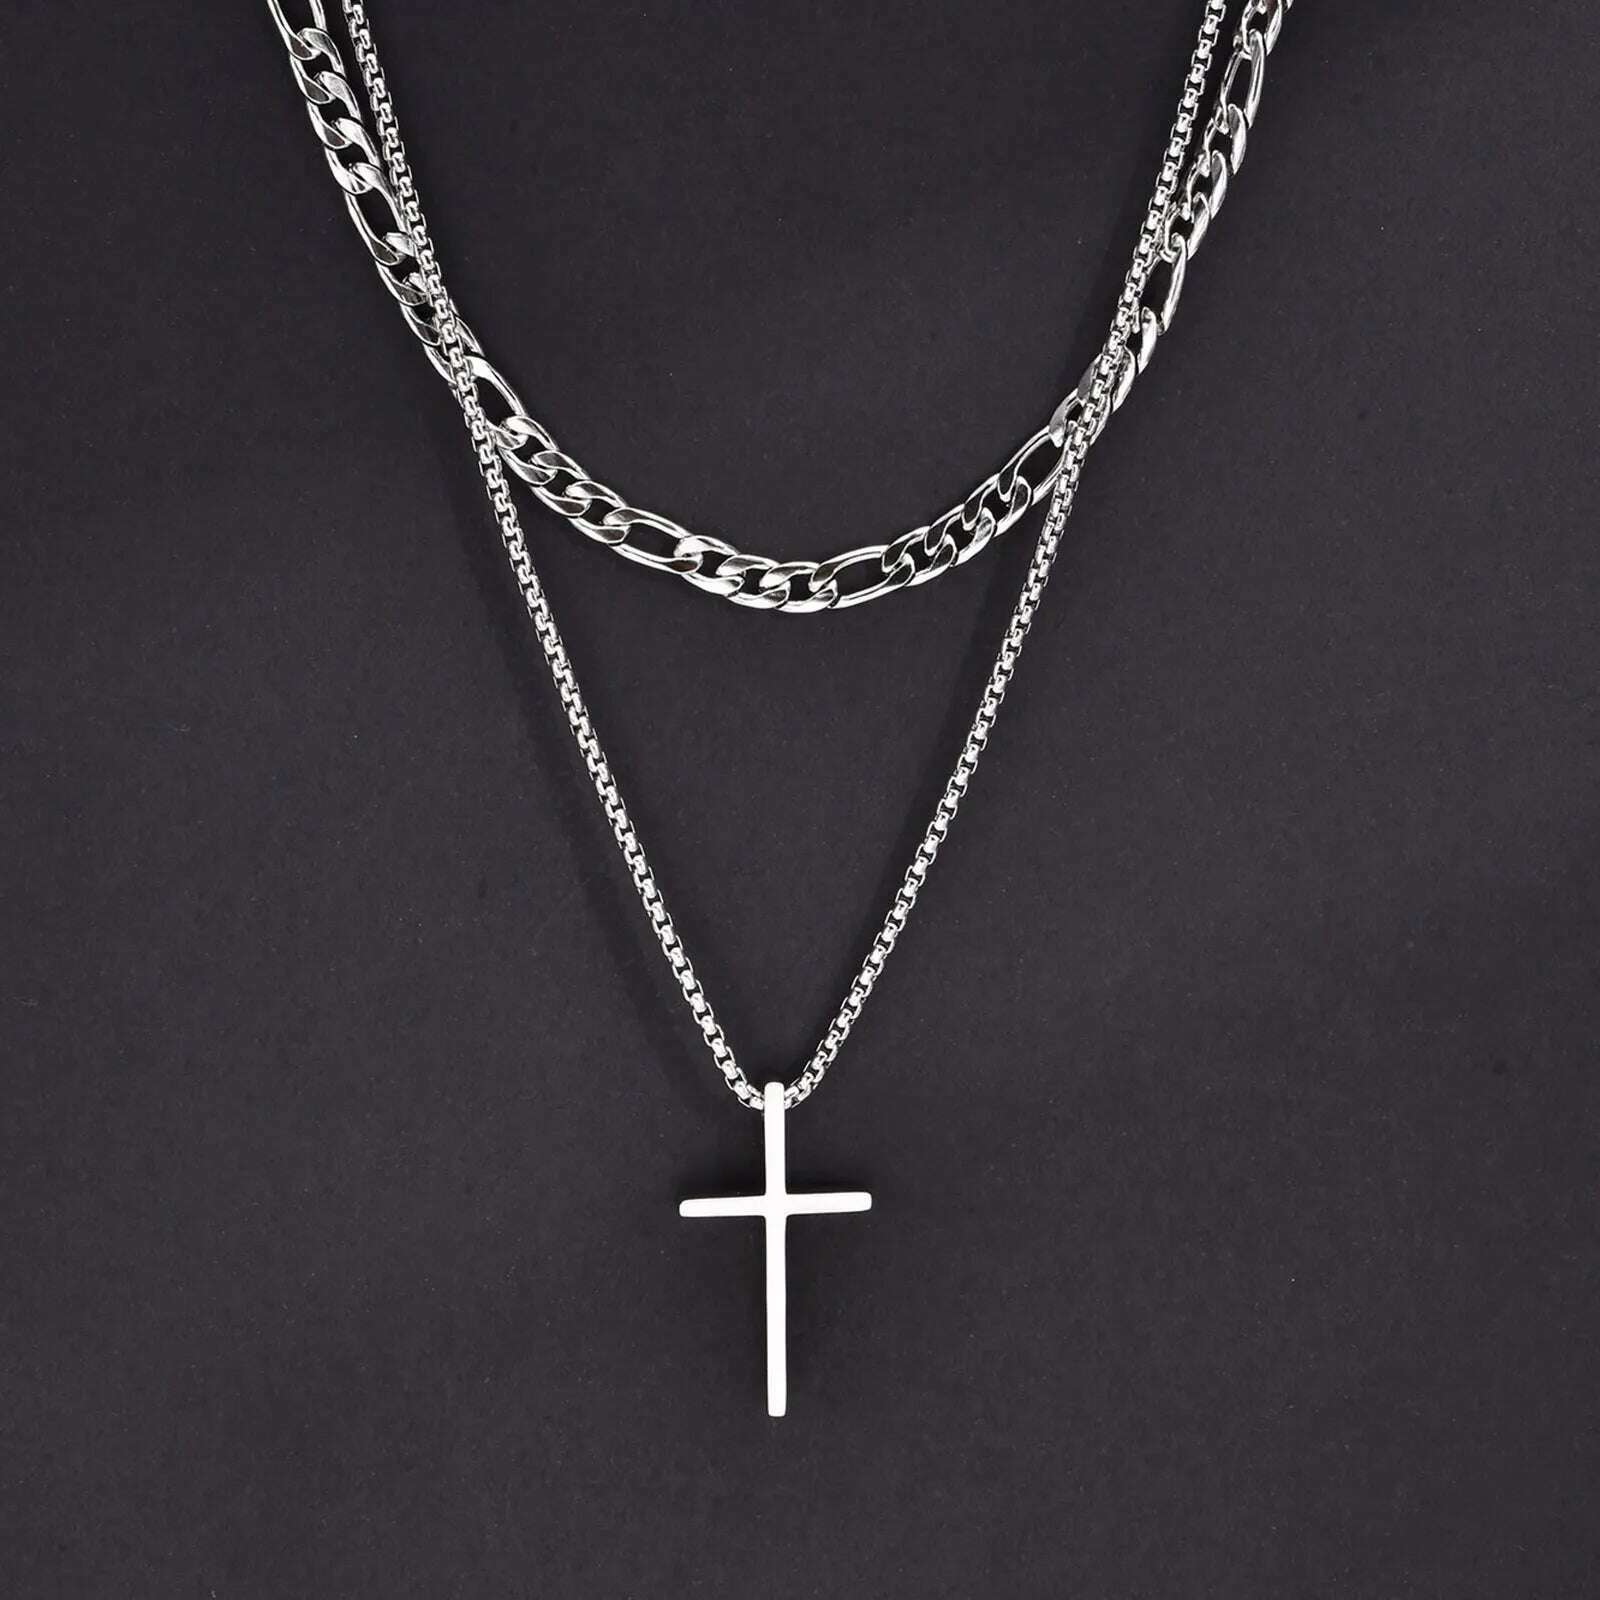 KIMLUD, Vnox Mens Cross Necklaces, Stainless Steel Layered Plain Cross Pendant, Rope Box Chain Necklace, Simple Prayer Jesus Collar, NC-1035S NC-158-50S, KIMLUD Womens Clothes